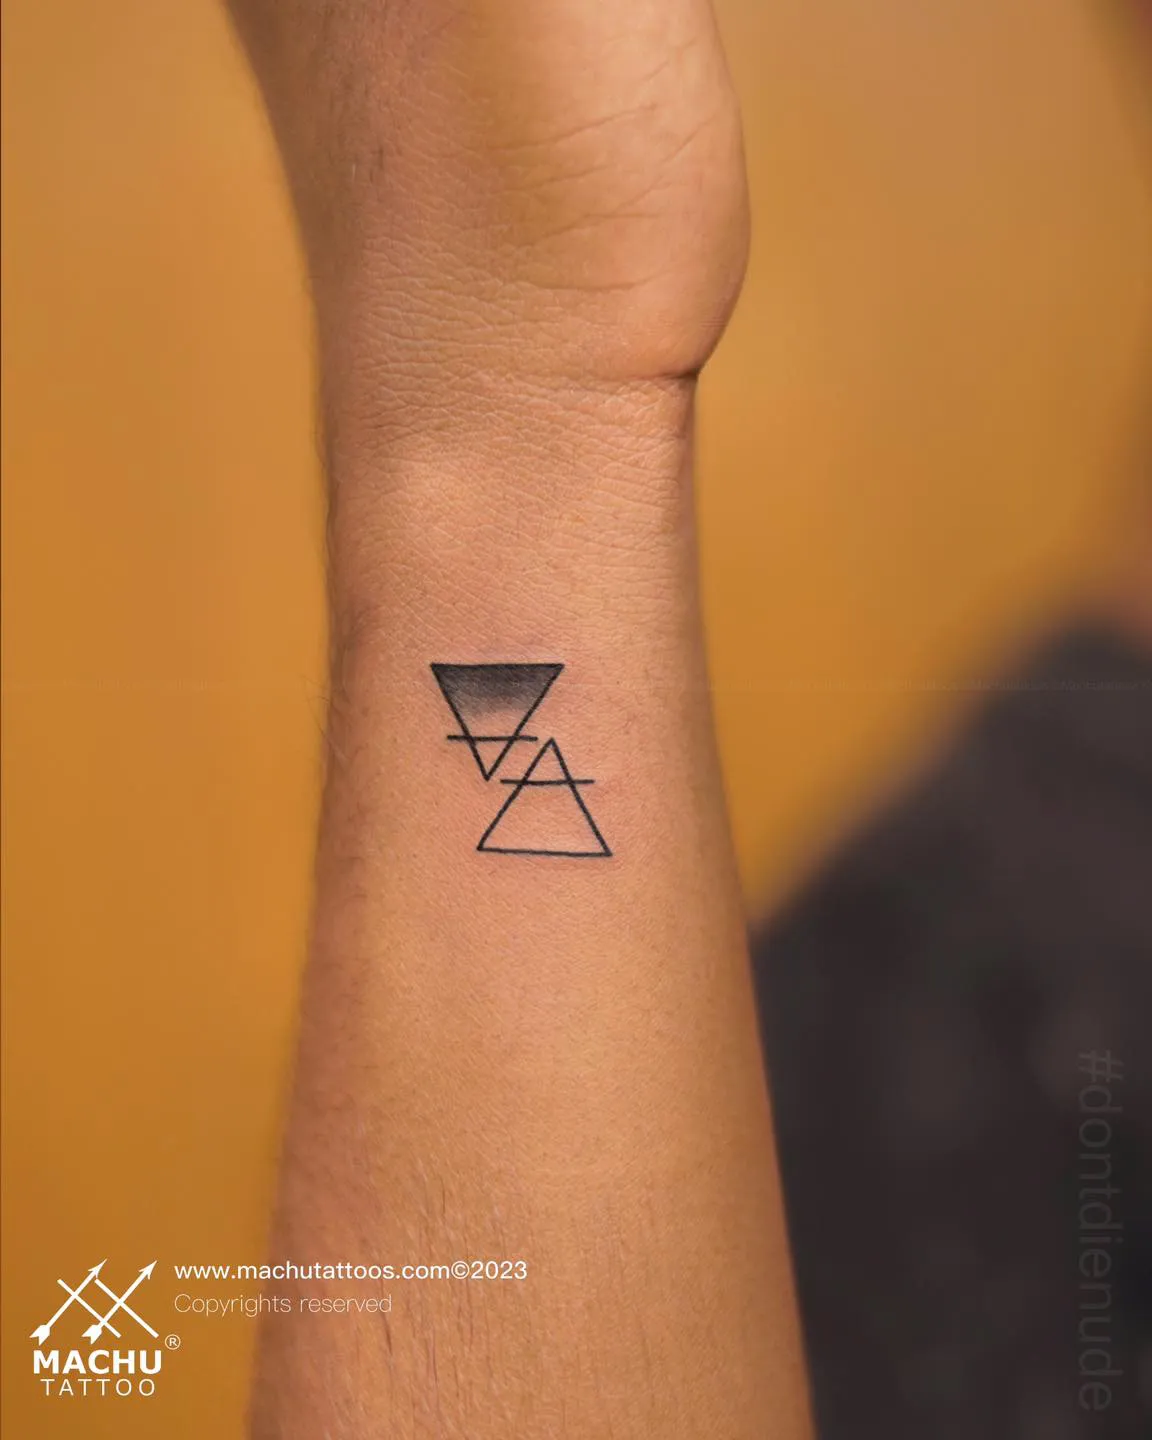 Pin by Alexis Santos on Tattoos | Tattoos, Triangle tattoo, Deathly hallows  tattoo